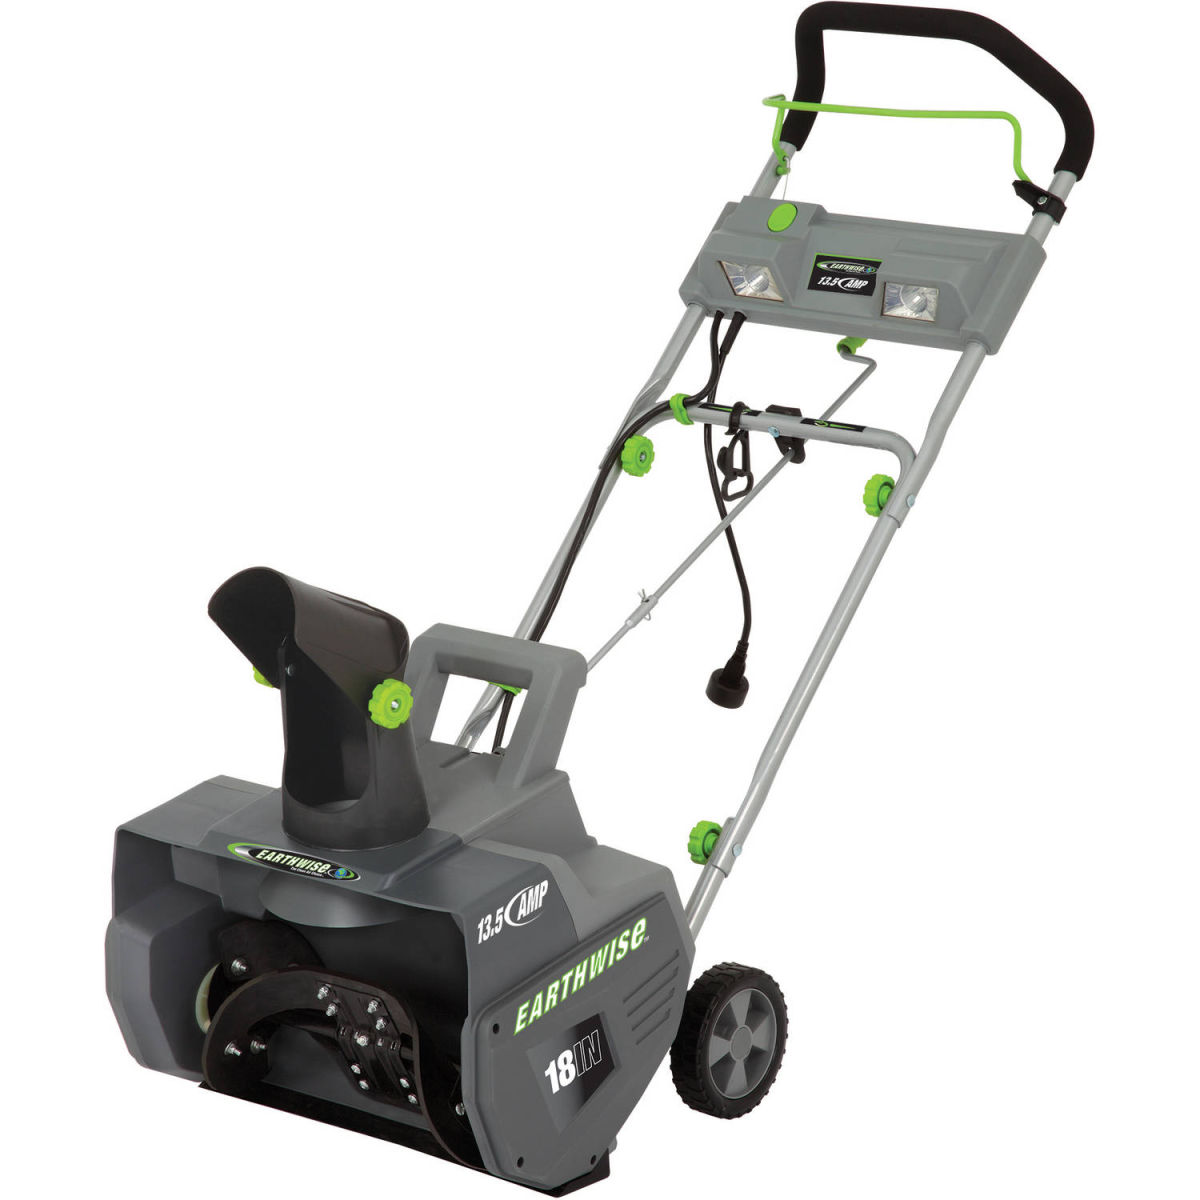 Earthwise SN72018 Electric Corded 13.5 Amp Snow Thrower